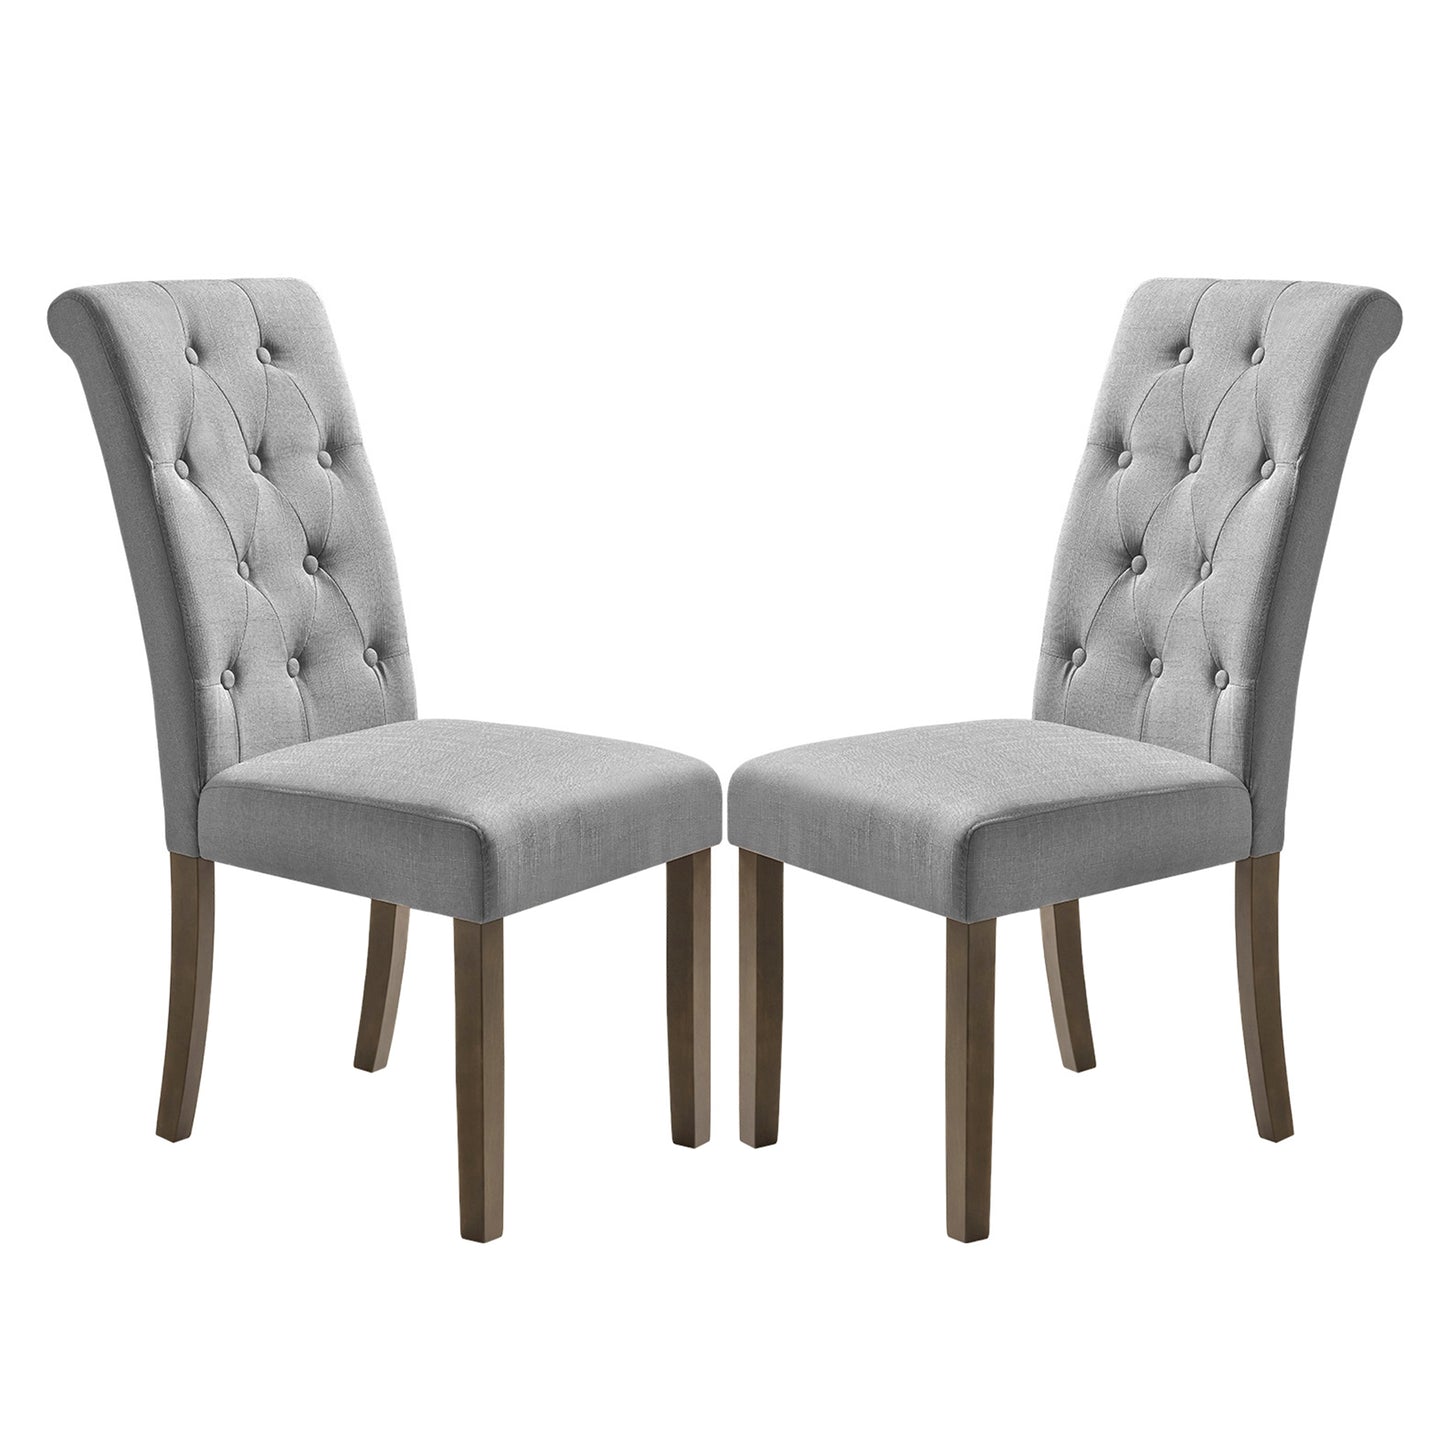 Aristocratic Style Dining Chair Noble and Elegant Solid Wood Tufted Dining Chair Dining Room Set (Set of 2)